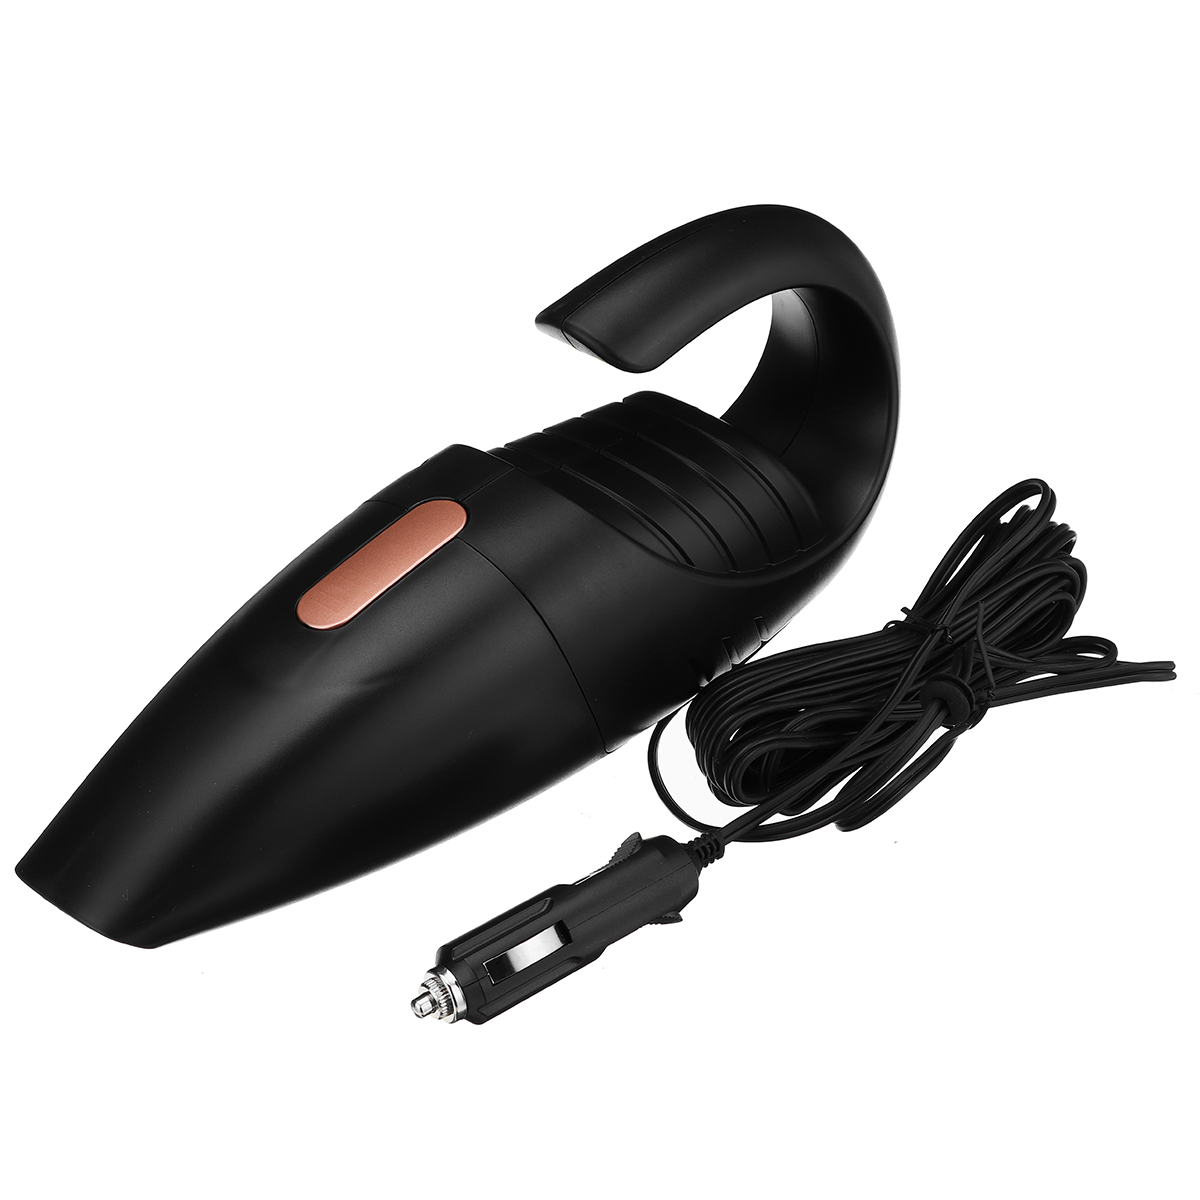 2V 72W Car Vacuum Cleaner Handheld Multi-Function Portable Wet Dry Suction for Auto Dust Duster